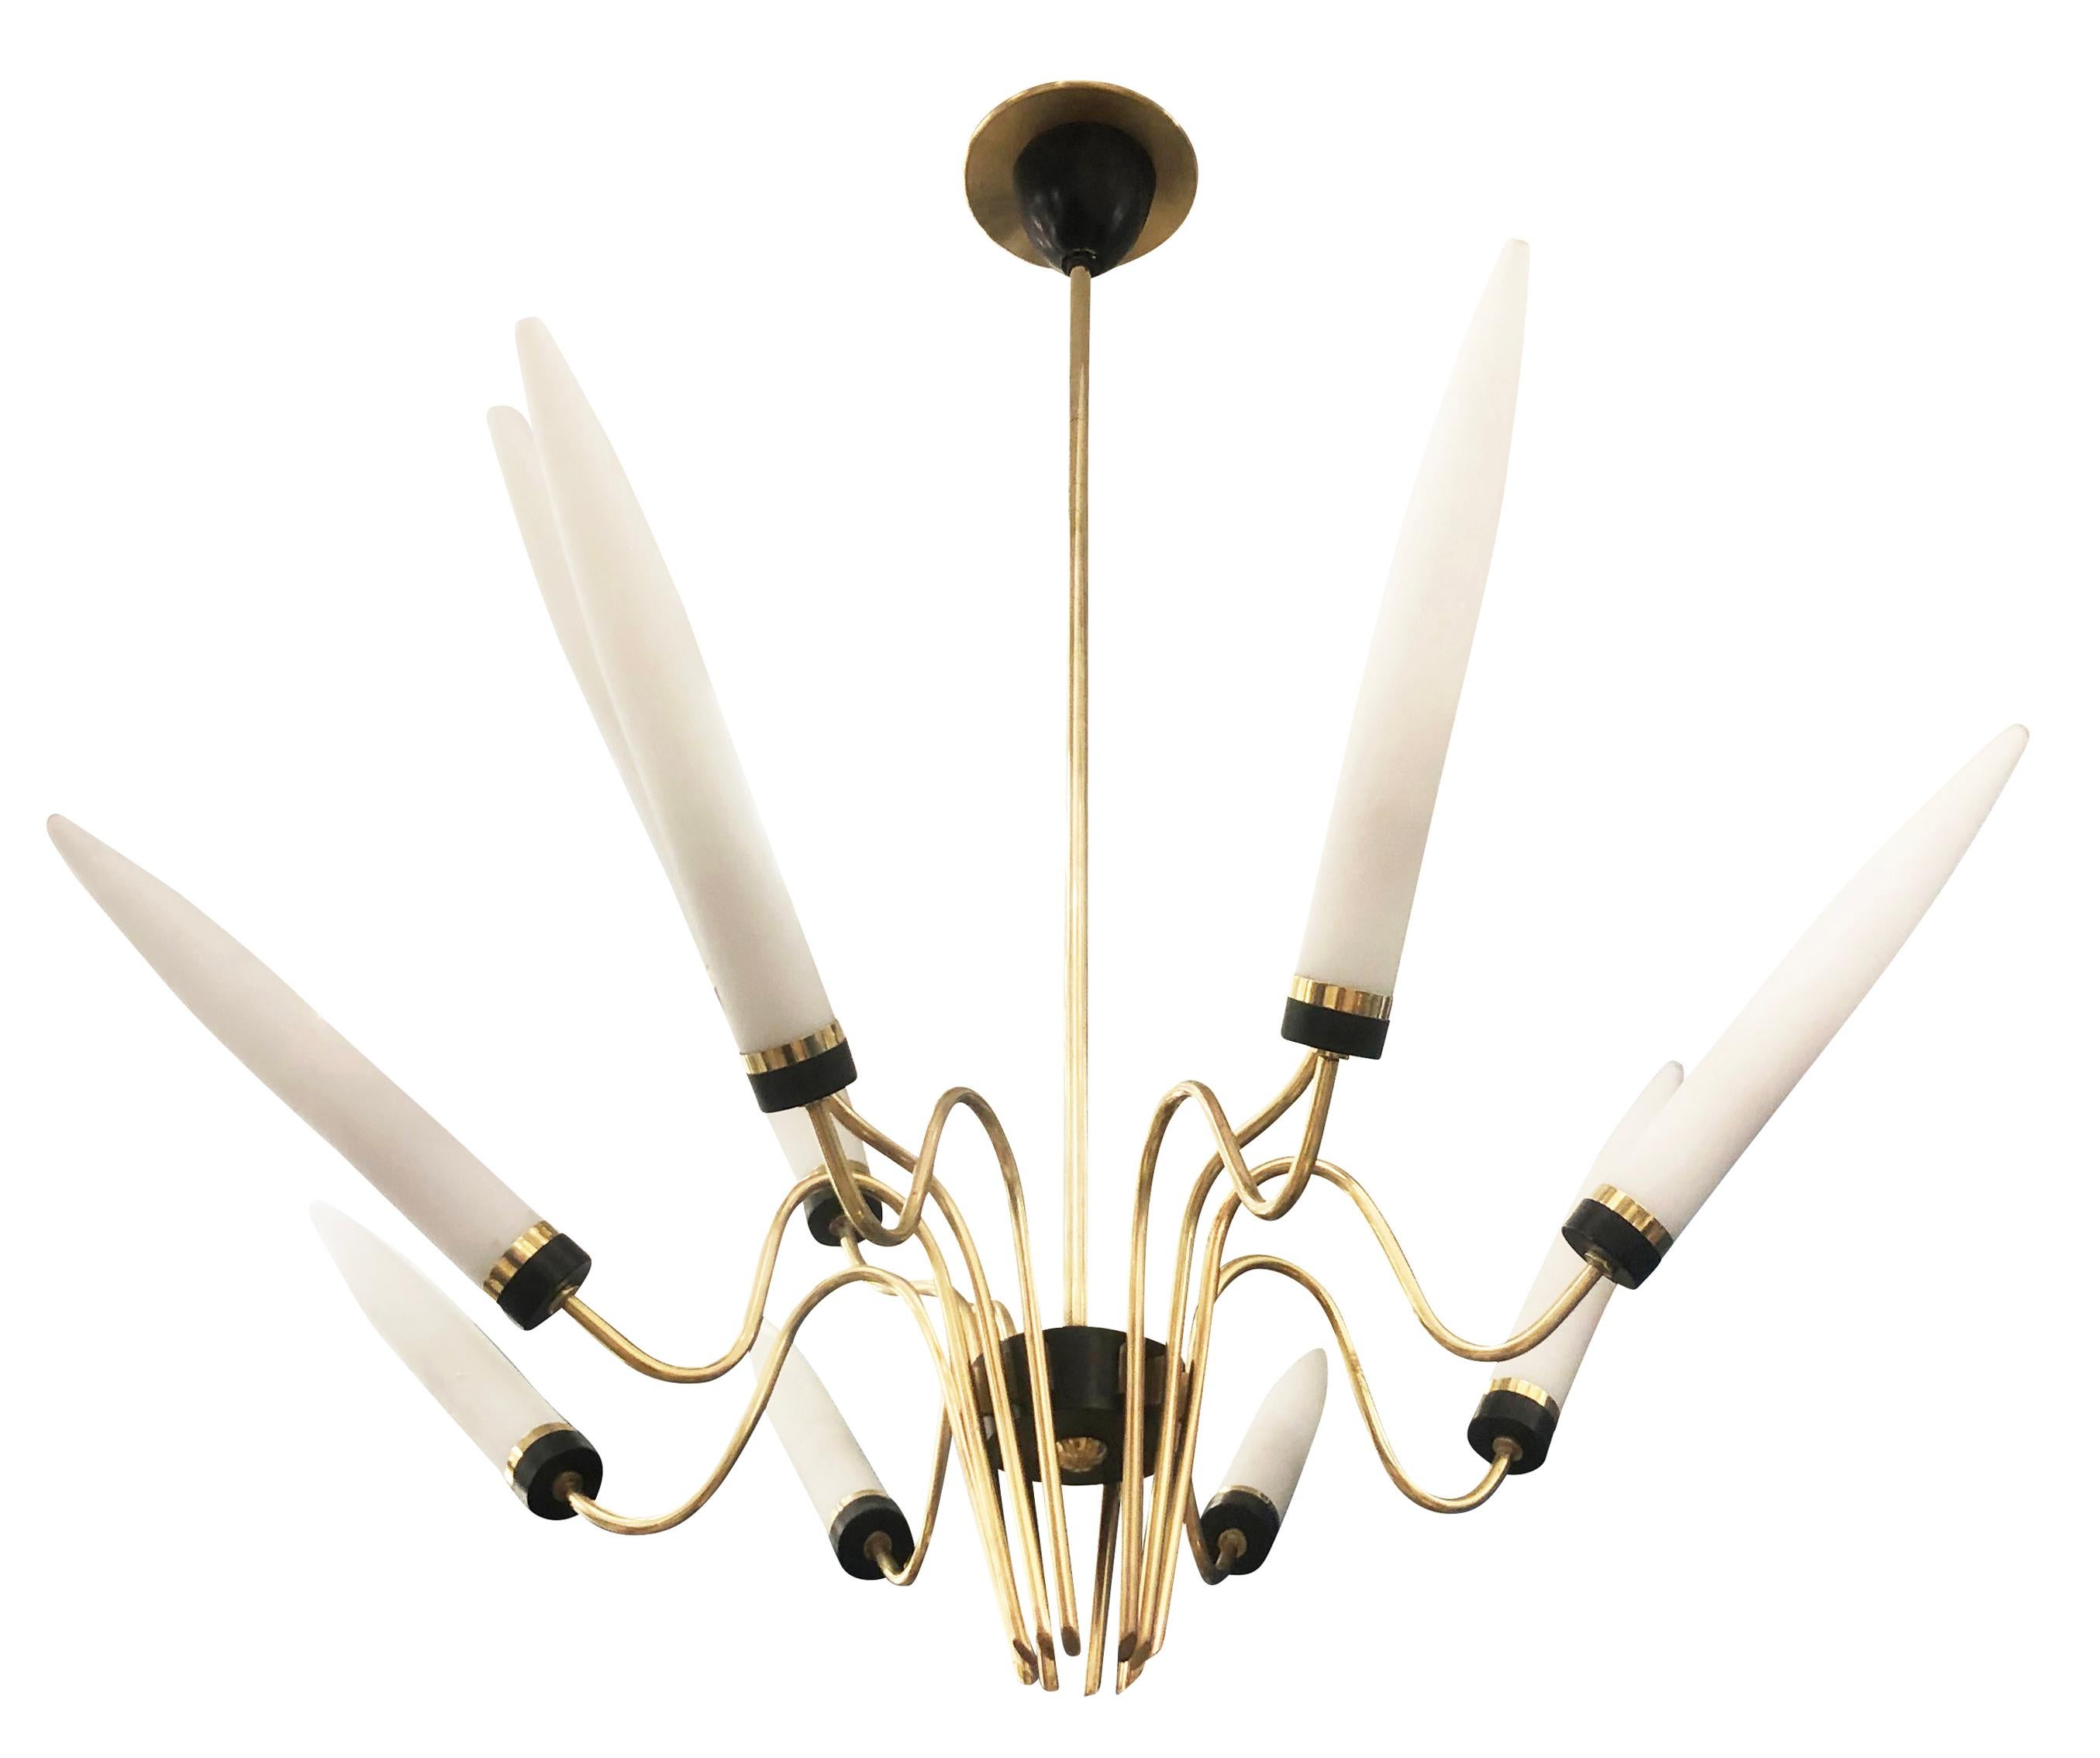 1960s midcentury chandelier reminiscent of the designs of Arredoluce with twelve elongated frosted glass shades mounted on sloping brass arms with black accents. Holds 12 candelabra sockets. Height of stem can be adjusted as needed.

Condition: